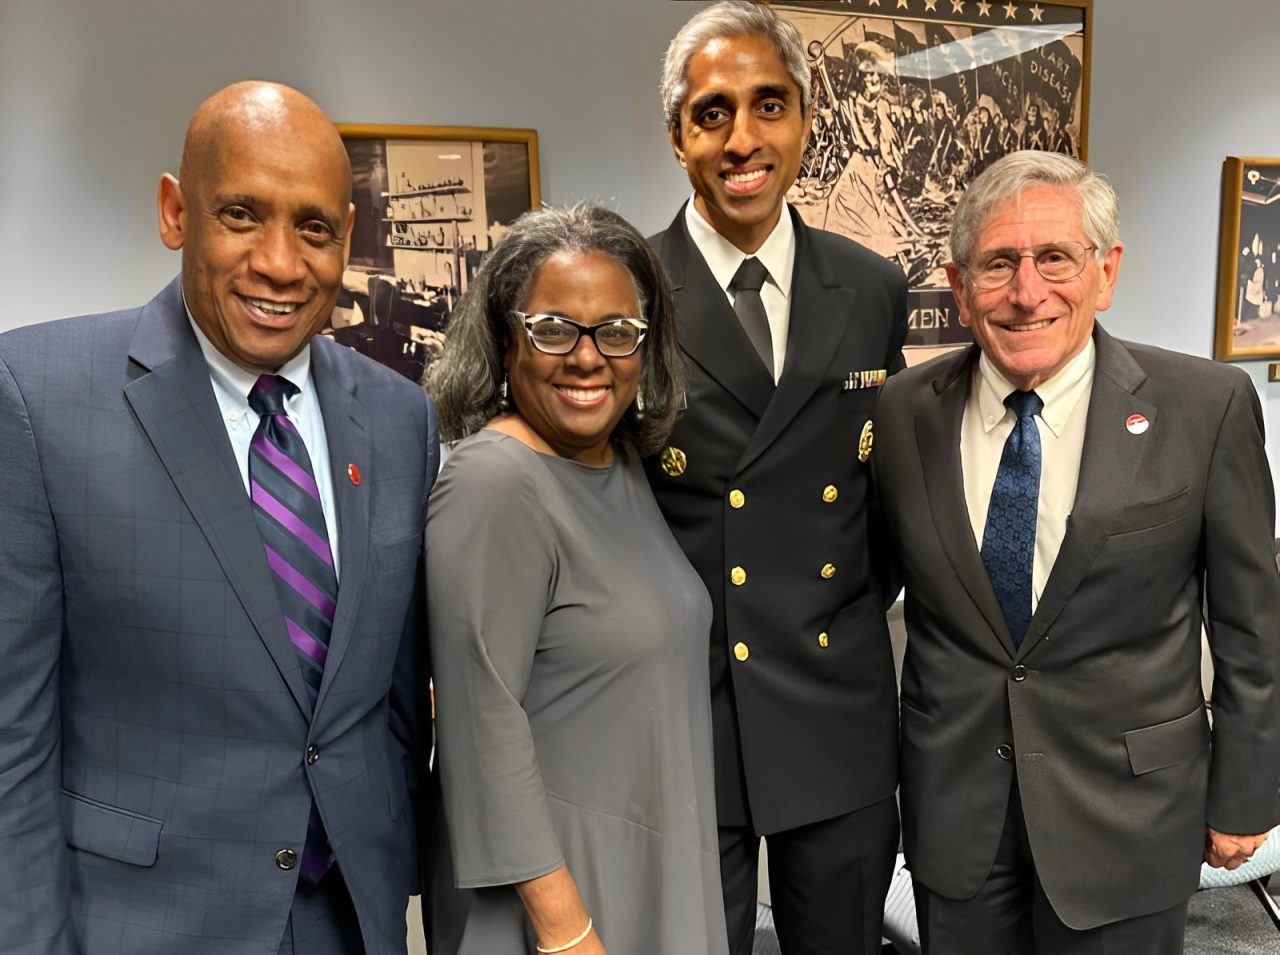 Thank you to U.S. Surgeon General Vivek Murthy for taking the time to speak with us about our shared efforts to tackle tobacco use in the United States. – Campaign for Tobacco-Free Kids